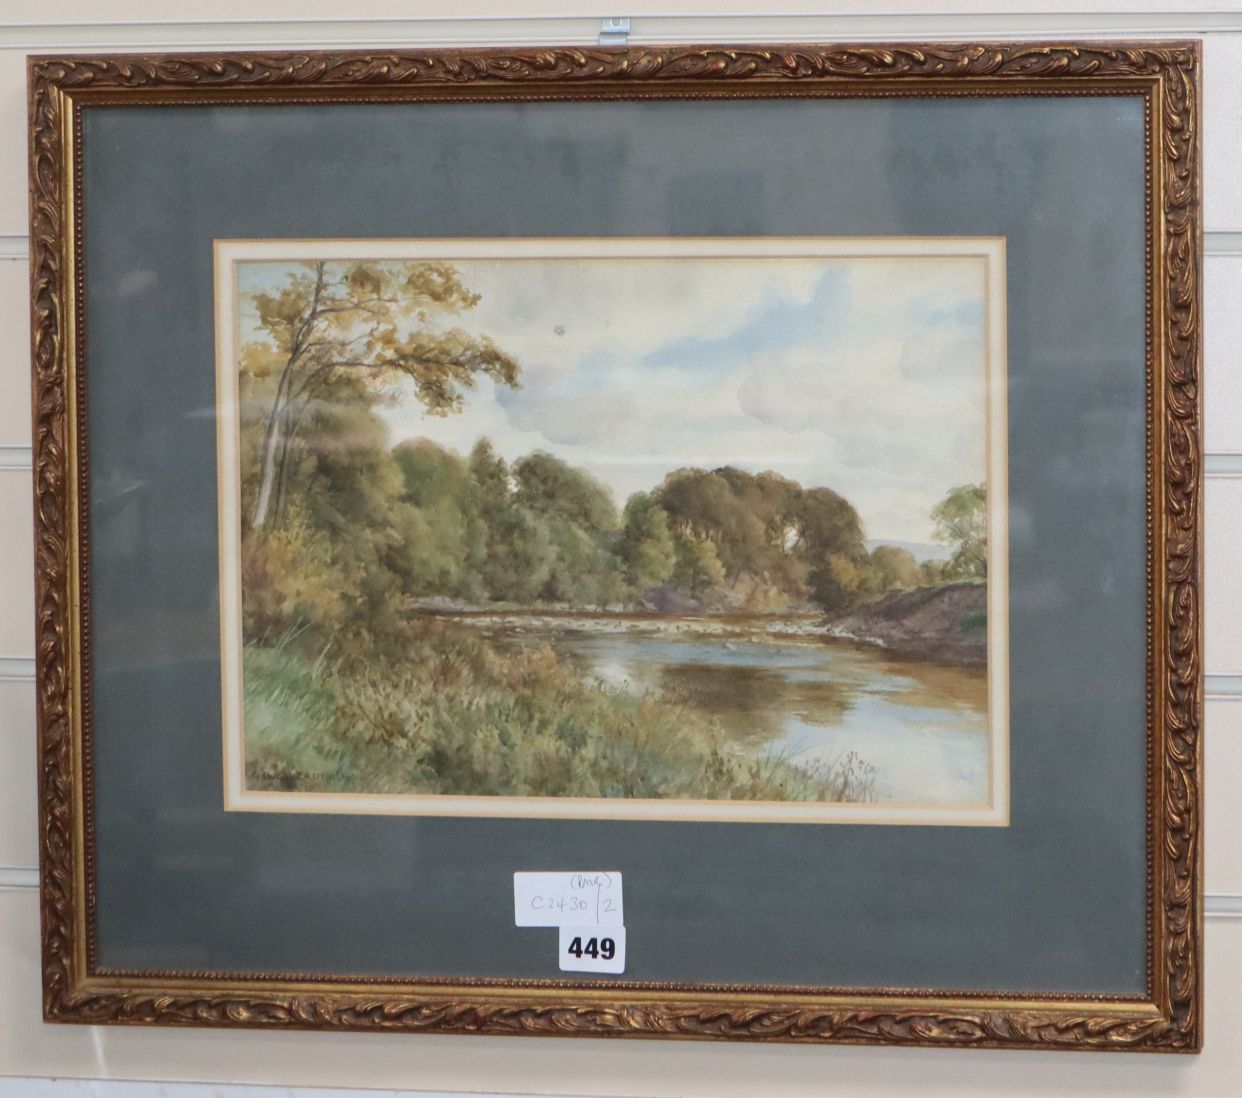 Benjamin Williams Leader, pair of watercolours, River landscapes, signed and dated 1904, 25 x 35cm - Image 2 of 2